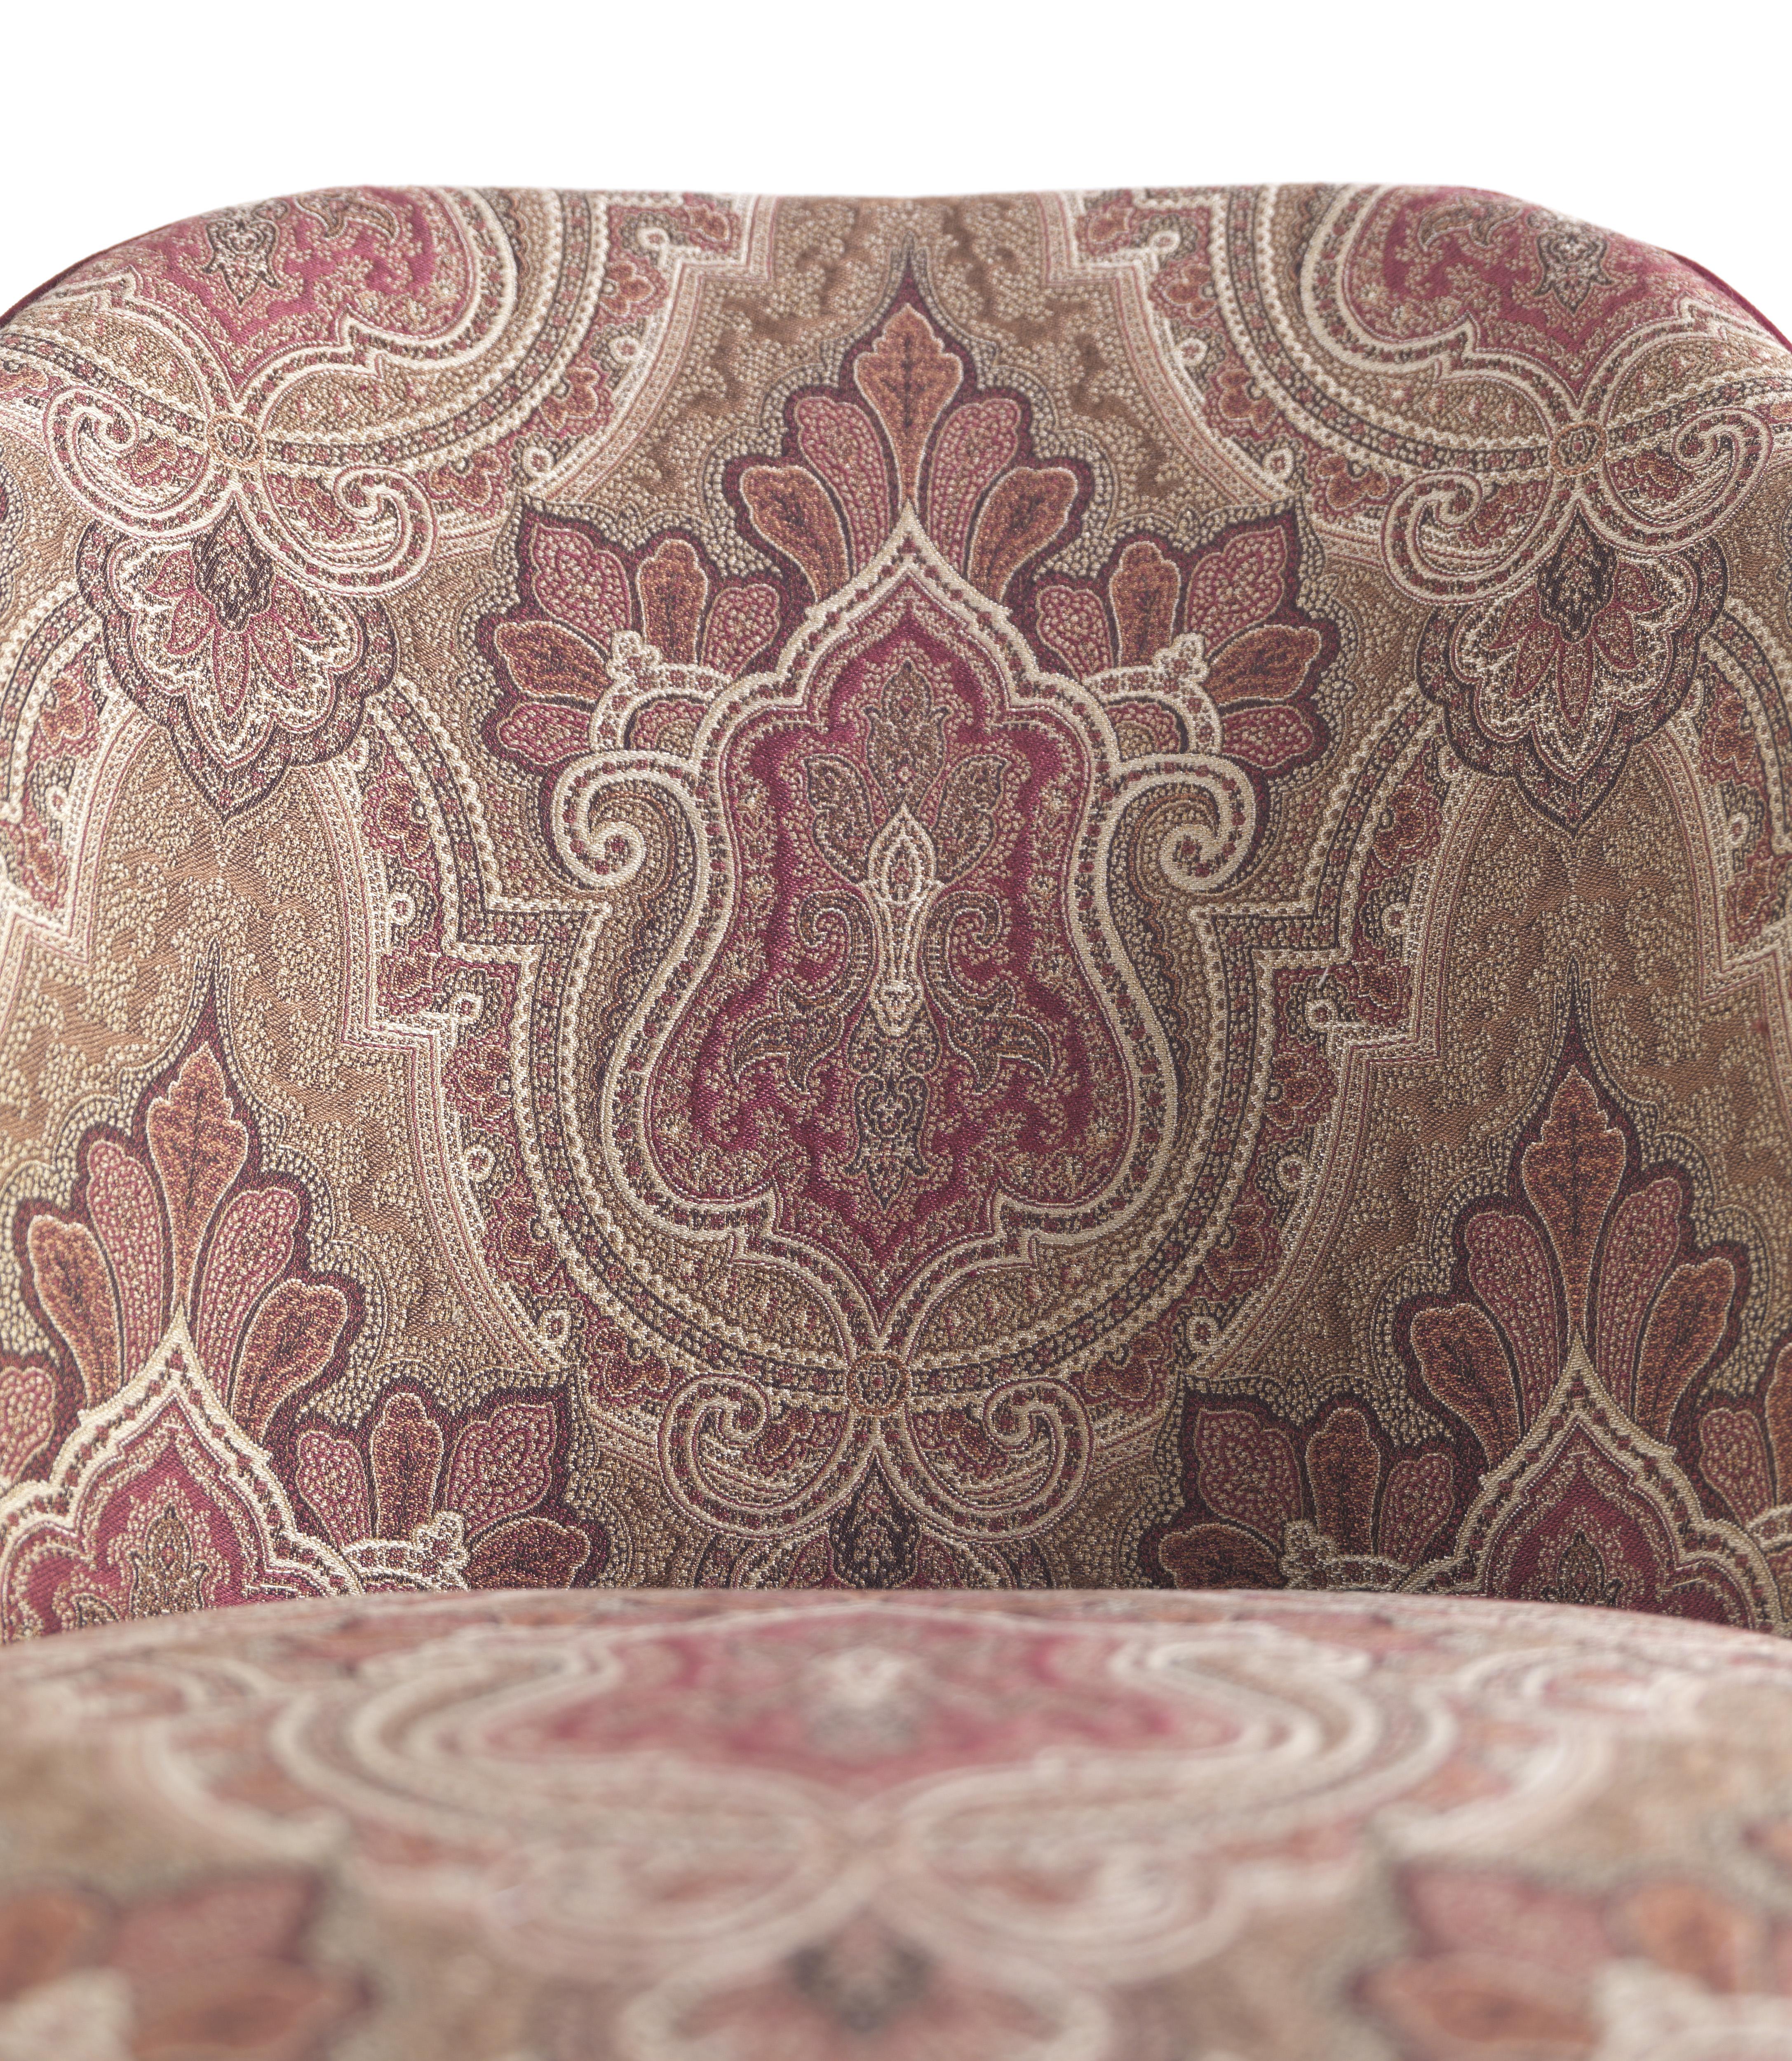 21st Century Frida Chair in Fabric by Etro Home Interiors In New Condition For Sale In Cantù, Lombardia